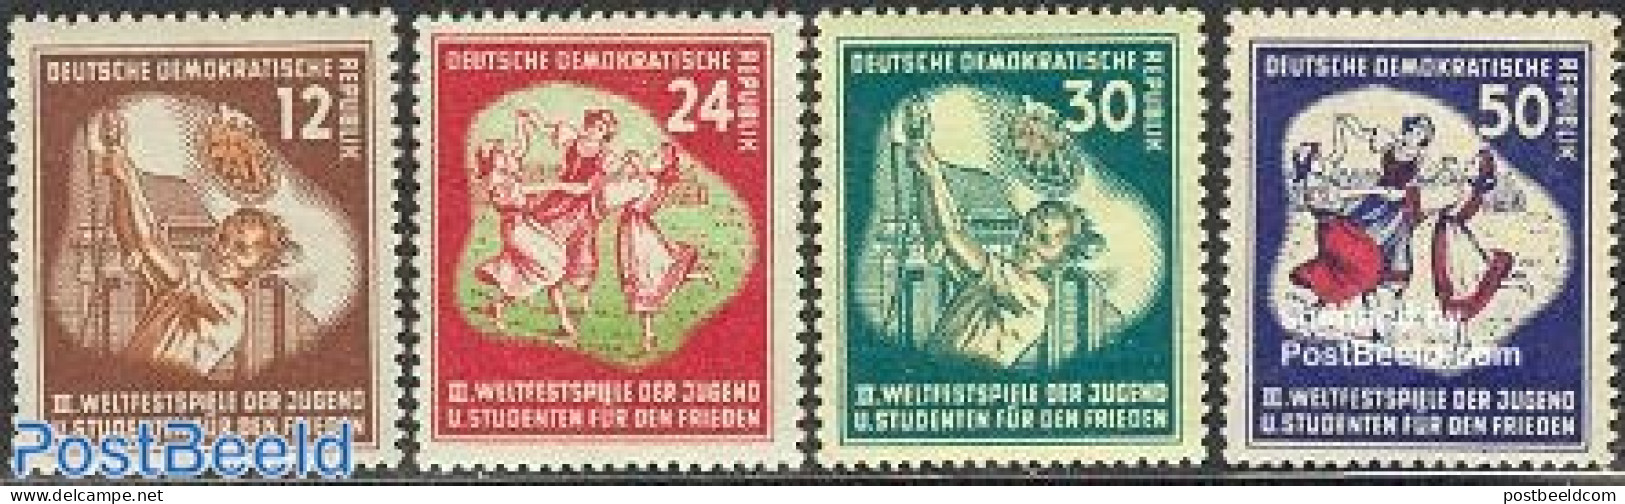 Germany, DDR 1951 Youth Games 4v, Mint NH, Performance Art - Dance & Ballet - Unused Stamps